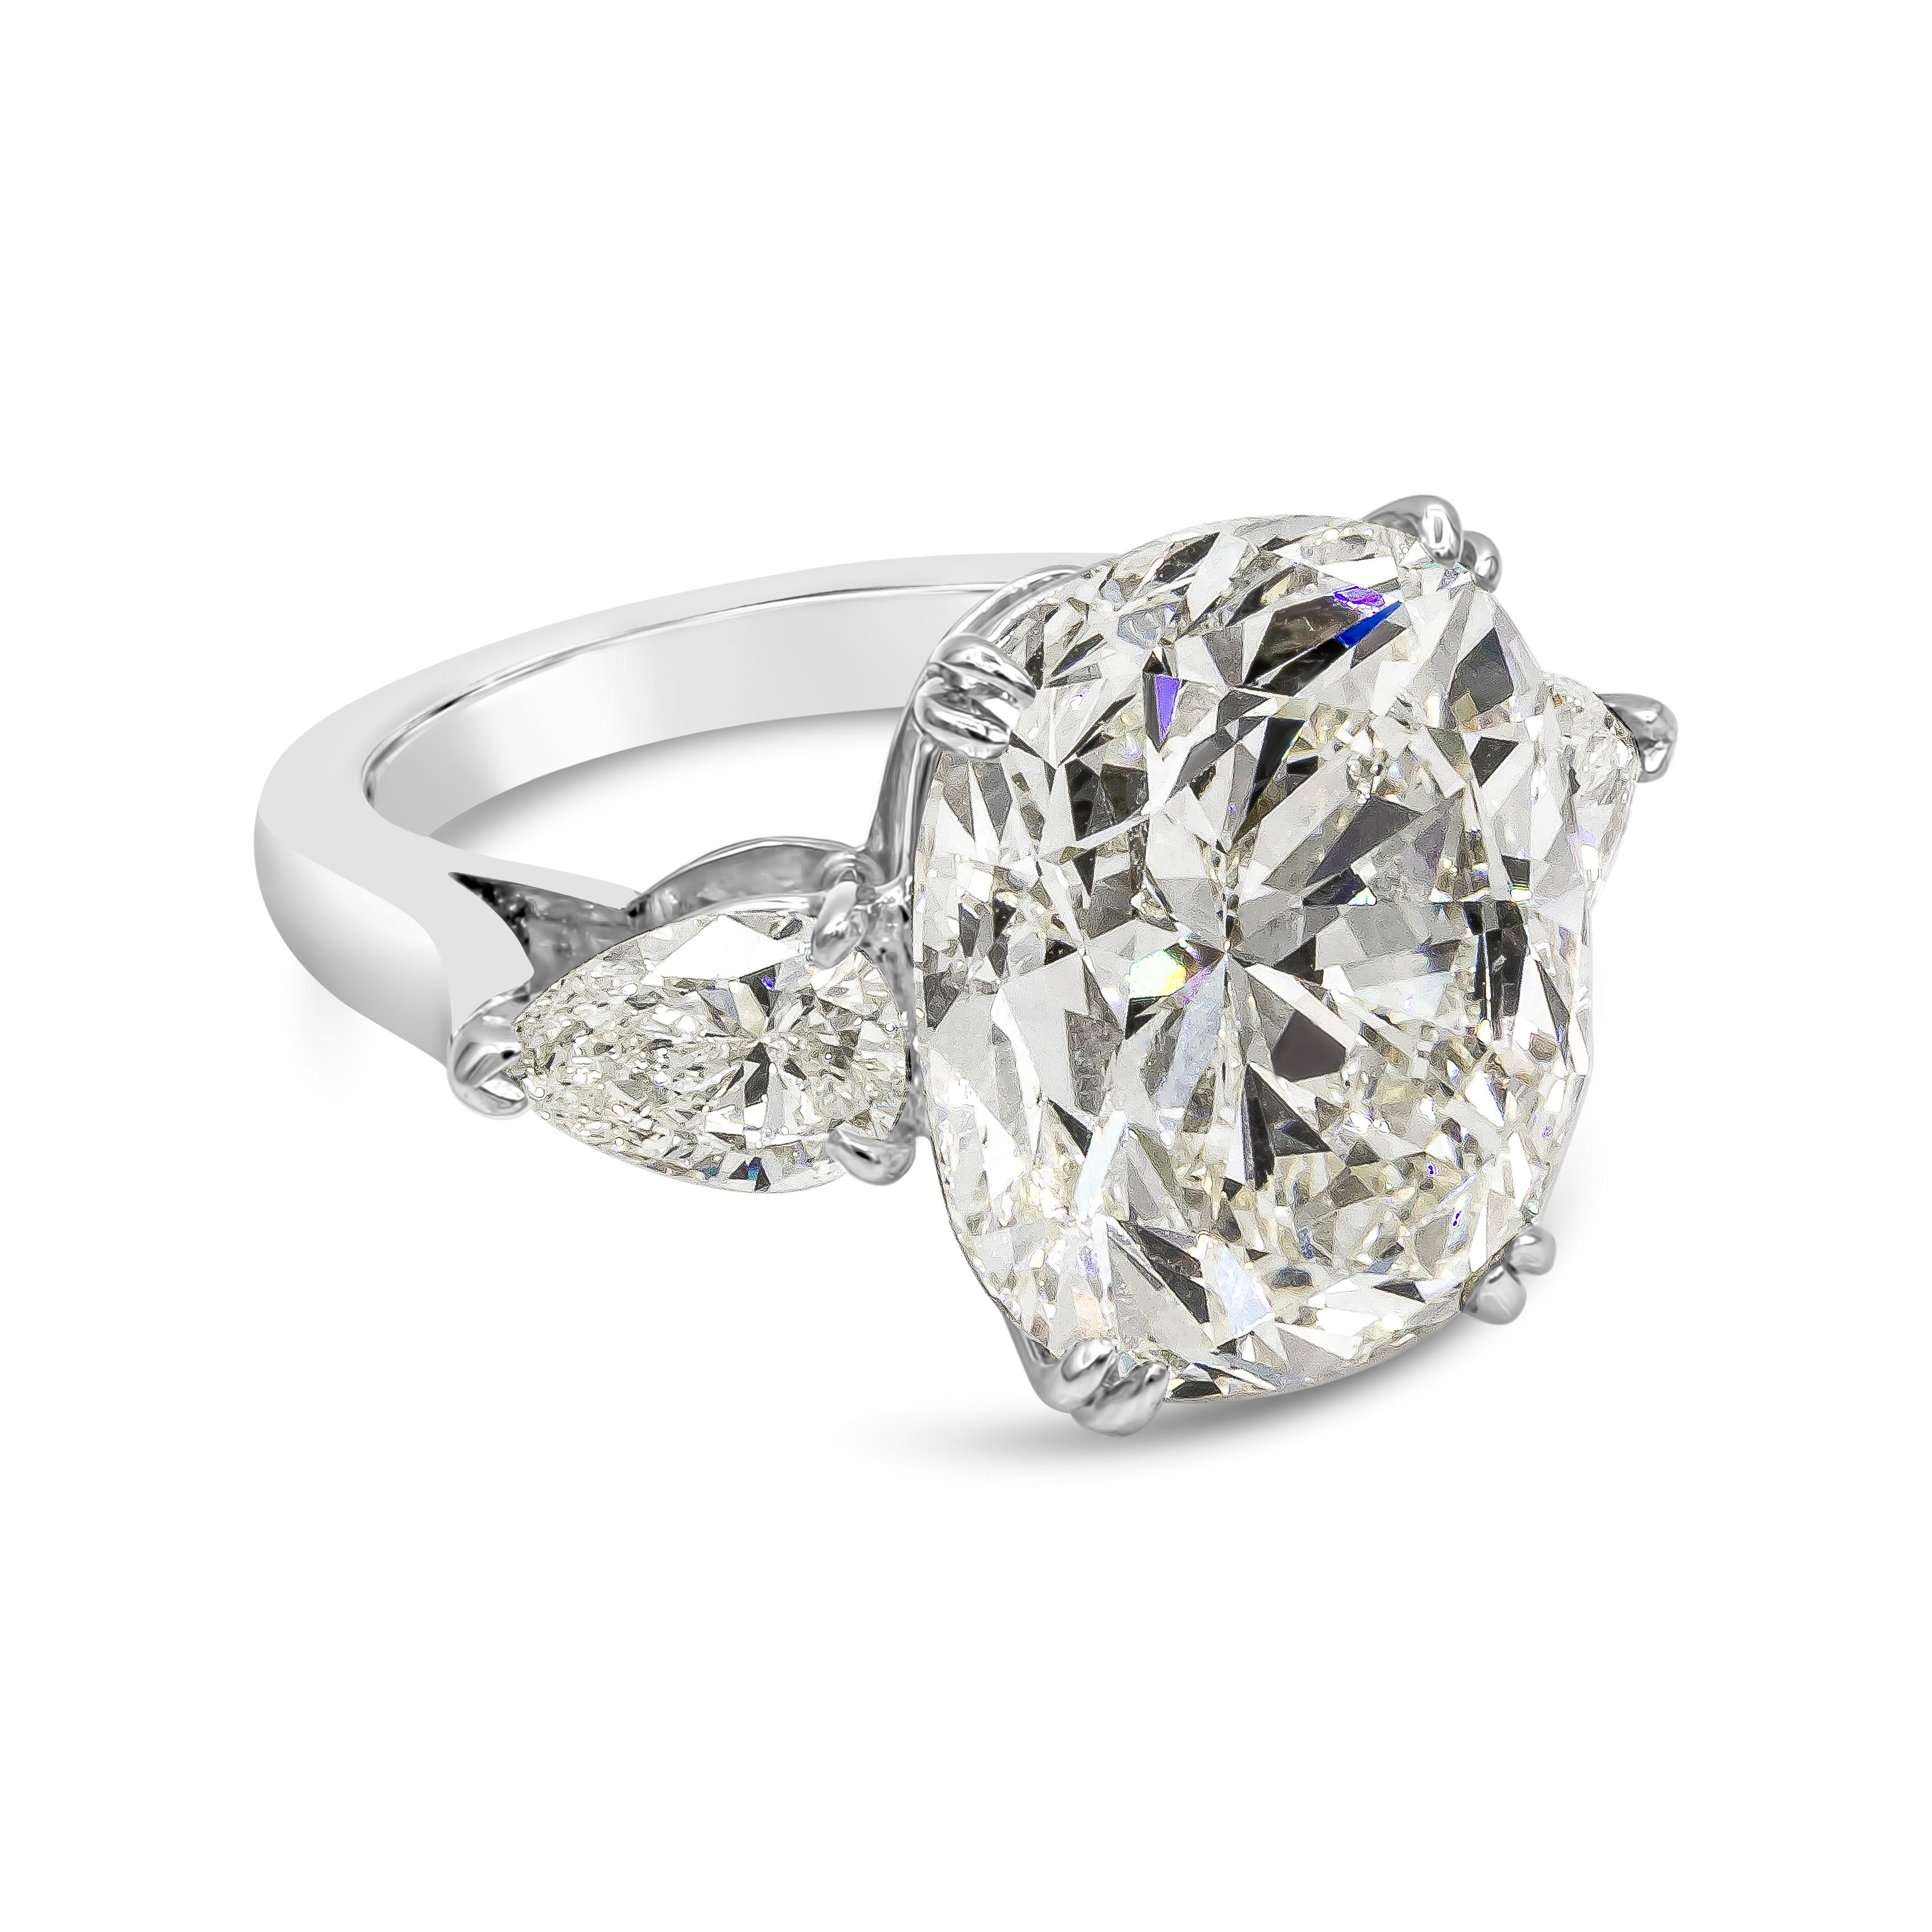 An important and modern engagement ring style showcasing a 13.23 carat cushion cut diamond certified by GIA as K color and SI1 in clarity. Flanking the center diamond are two brilliant pear shape diamonds weighing 1.52 carats total. Set in a